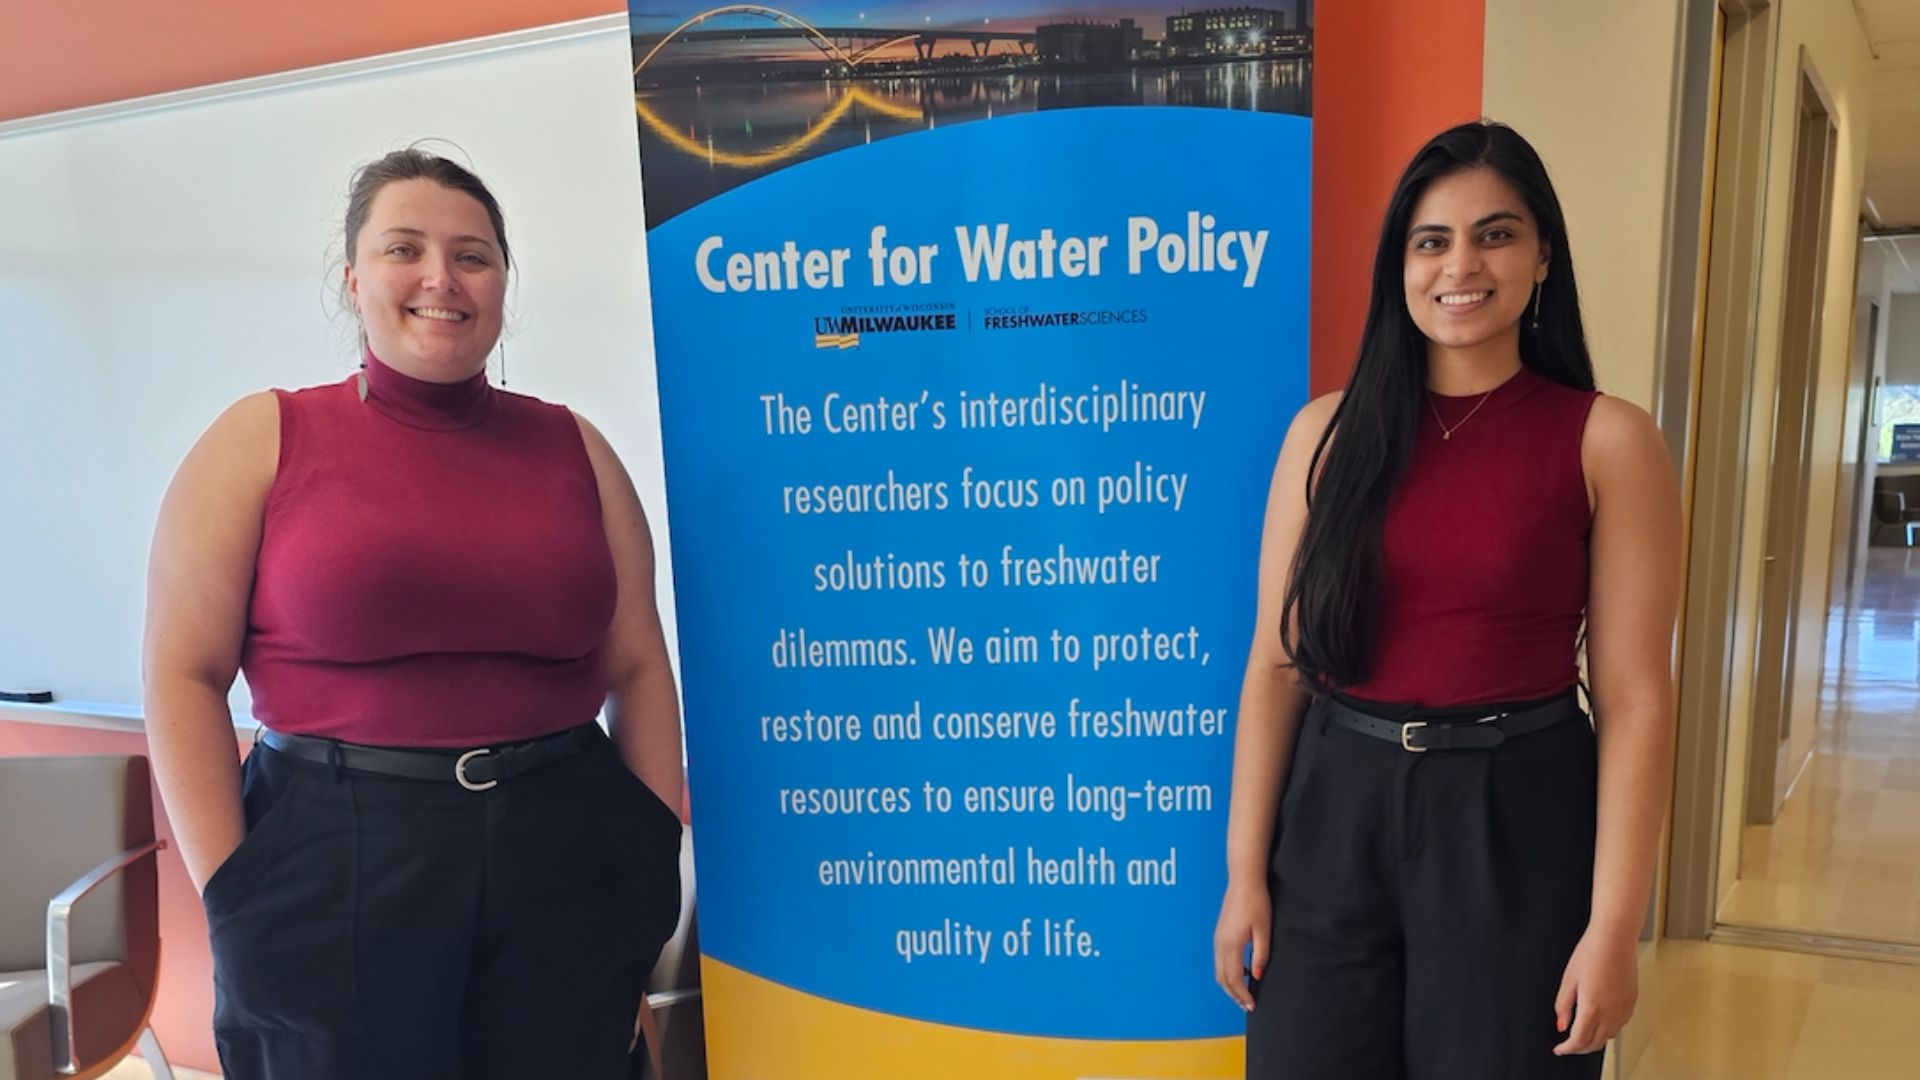 Center for Water Policy Accepting Applications for Water Policy Specialist